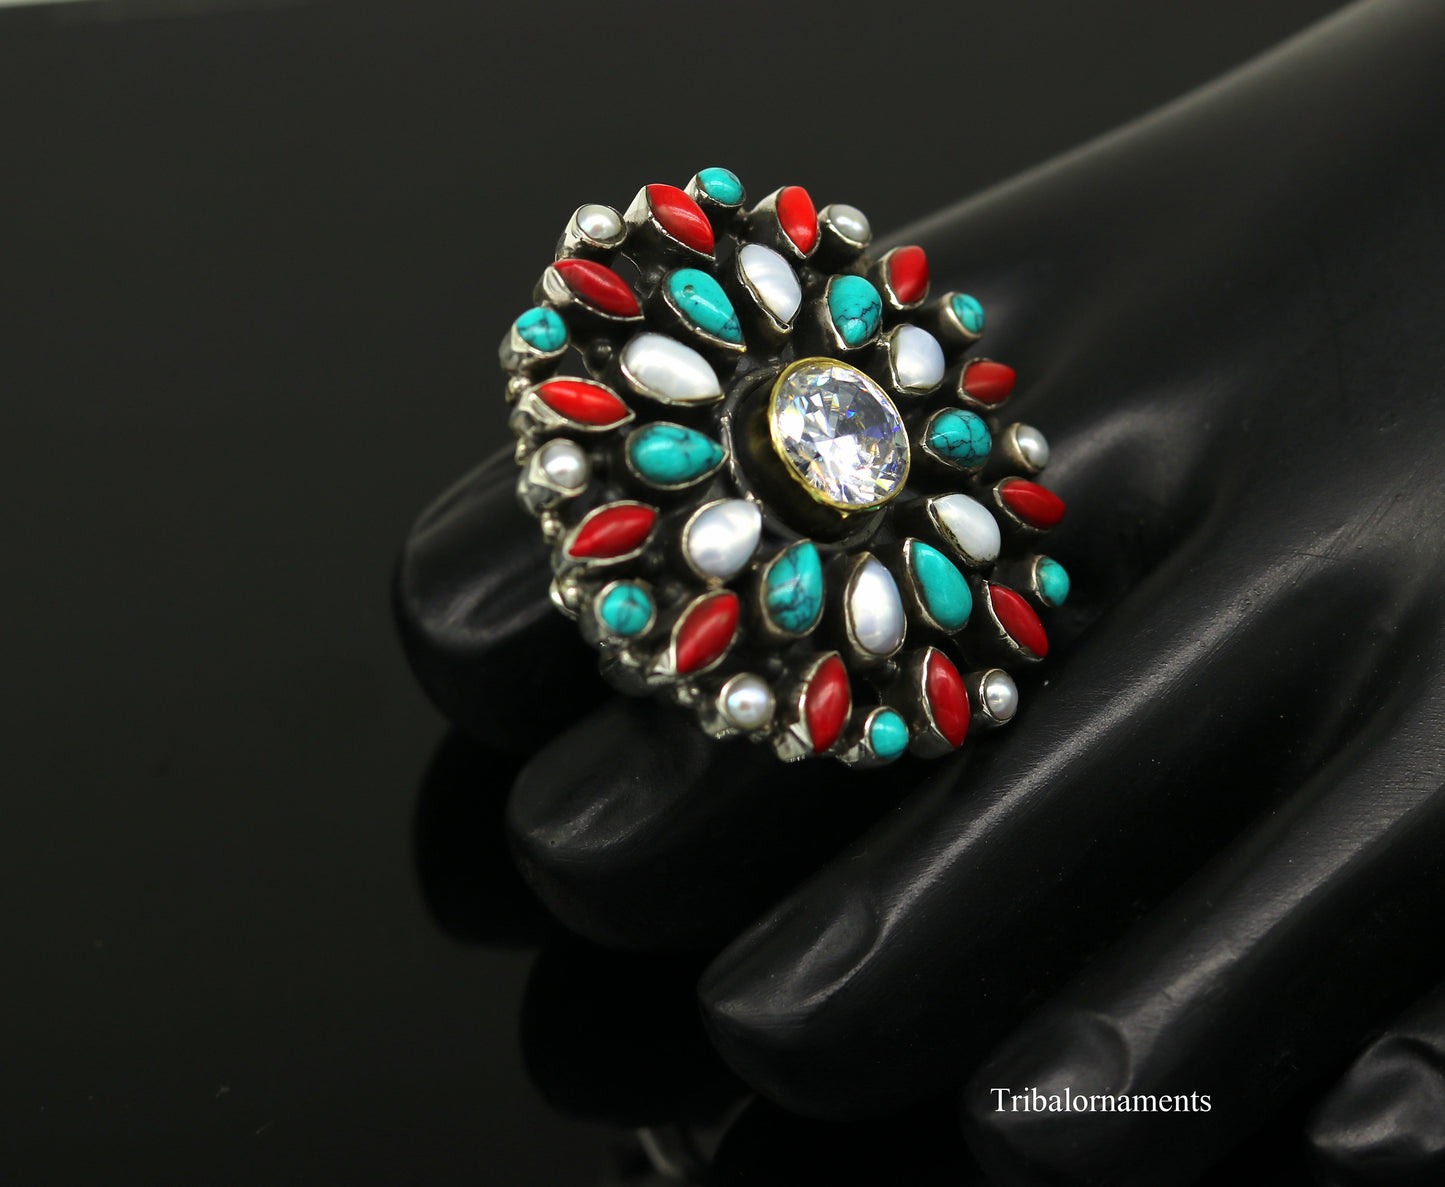 925 sterling silver handmade fabulous ring with gorgeous turquoise stone and pearl,stylish adjustable customized ring unisex jewelry sr264 - TRIBAL ORNAMENTS